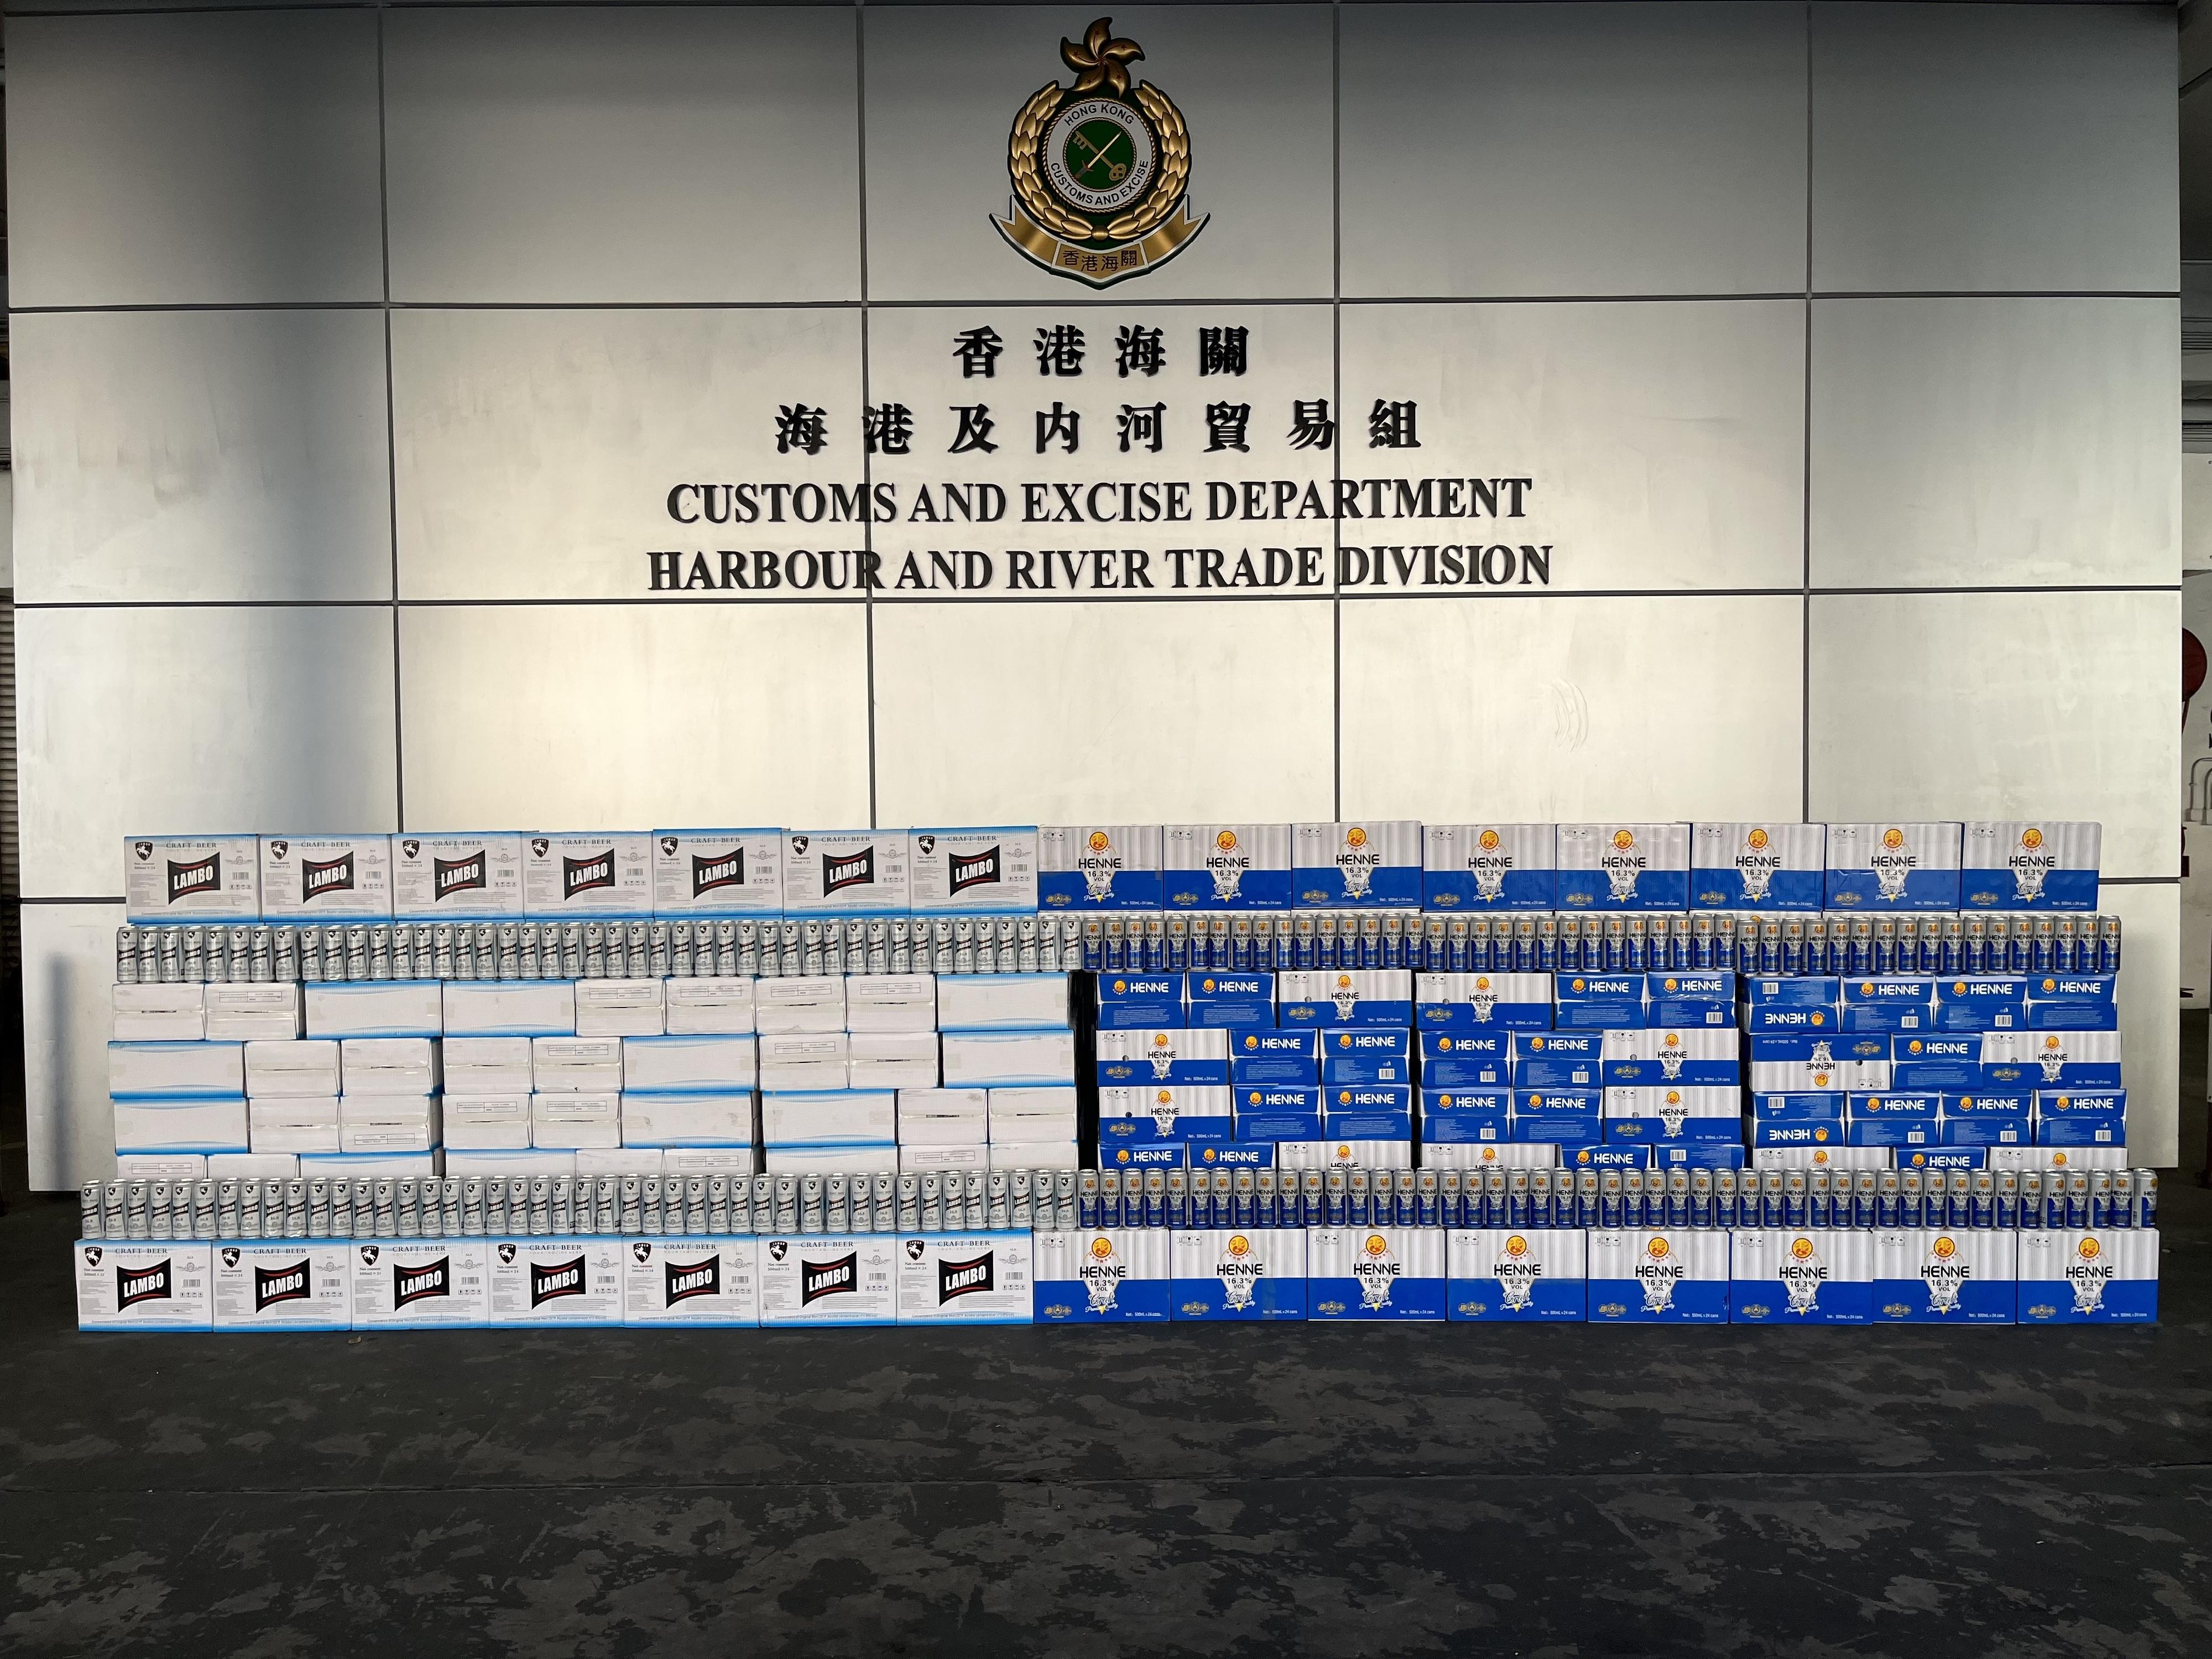 Hong Kong Customs yesterday (March 7) seized about 51 480 cans of suspected smuggled beer, with an estimated market value of about $1.54 million, at the Kwai Tsing Container Terminals. Photo shows some of the suspected smuggled beer seized. 